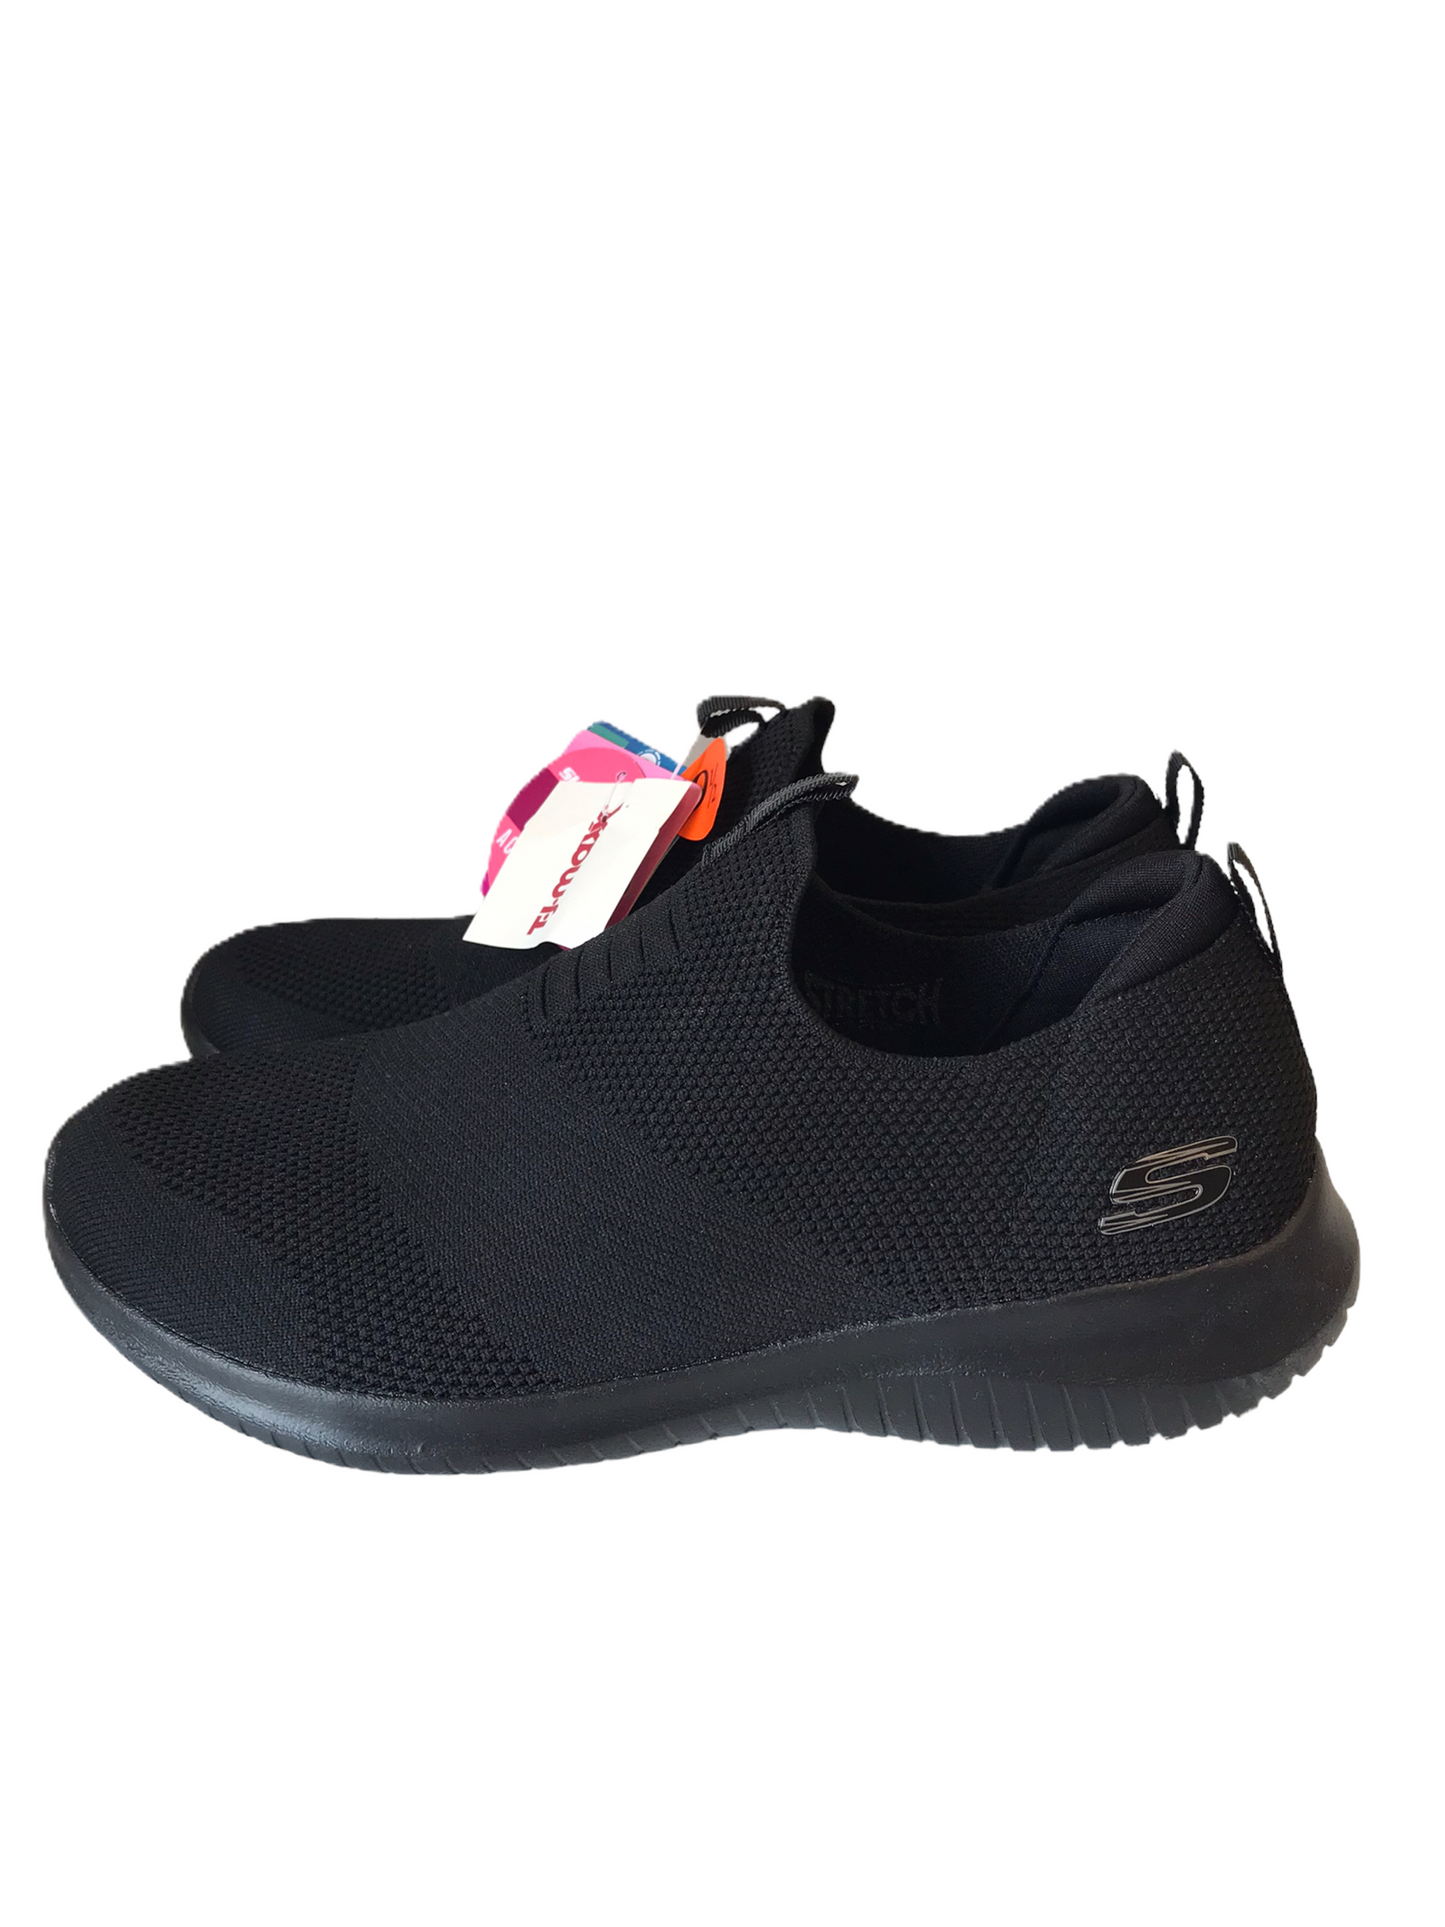 Black Shoes Sneakers By Skechers, Size: 9.5